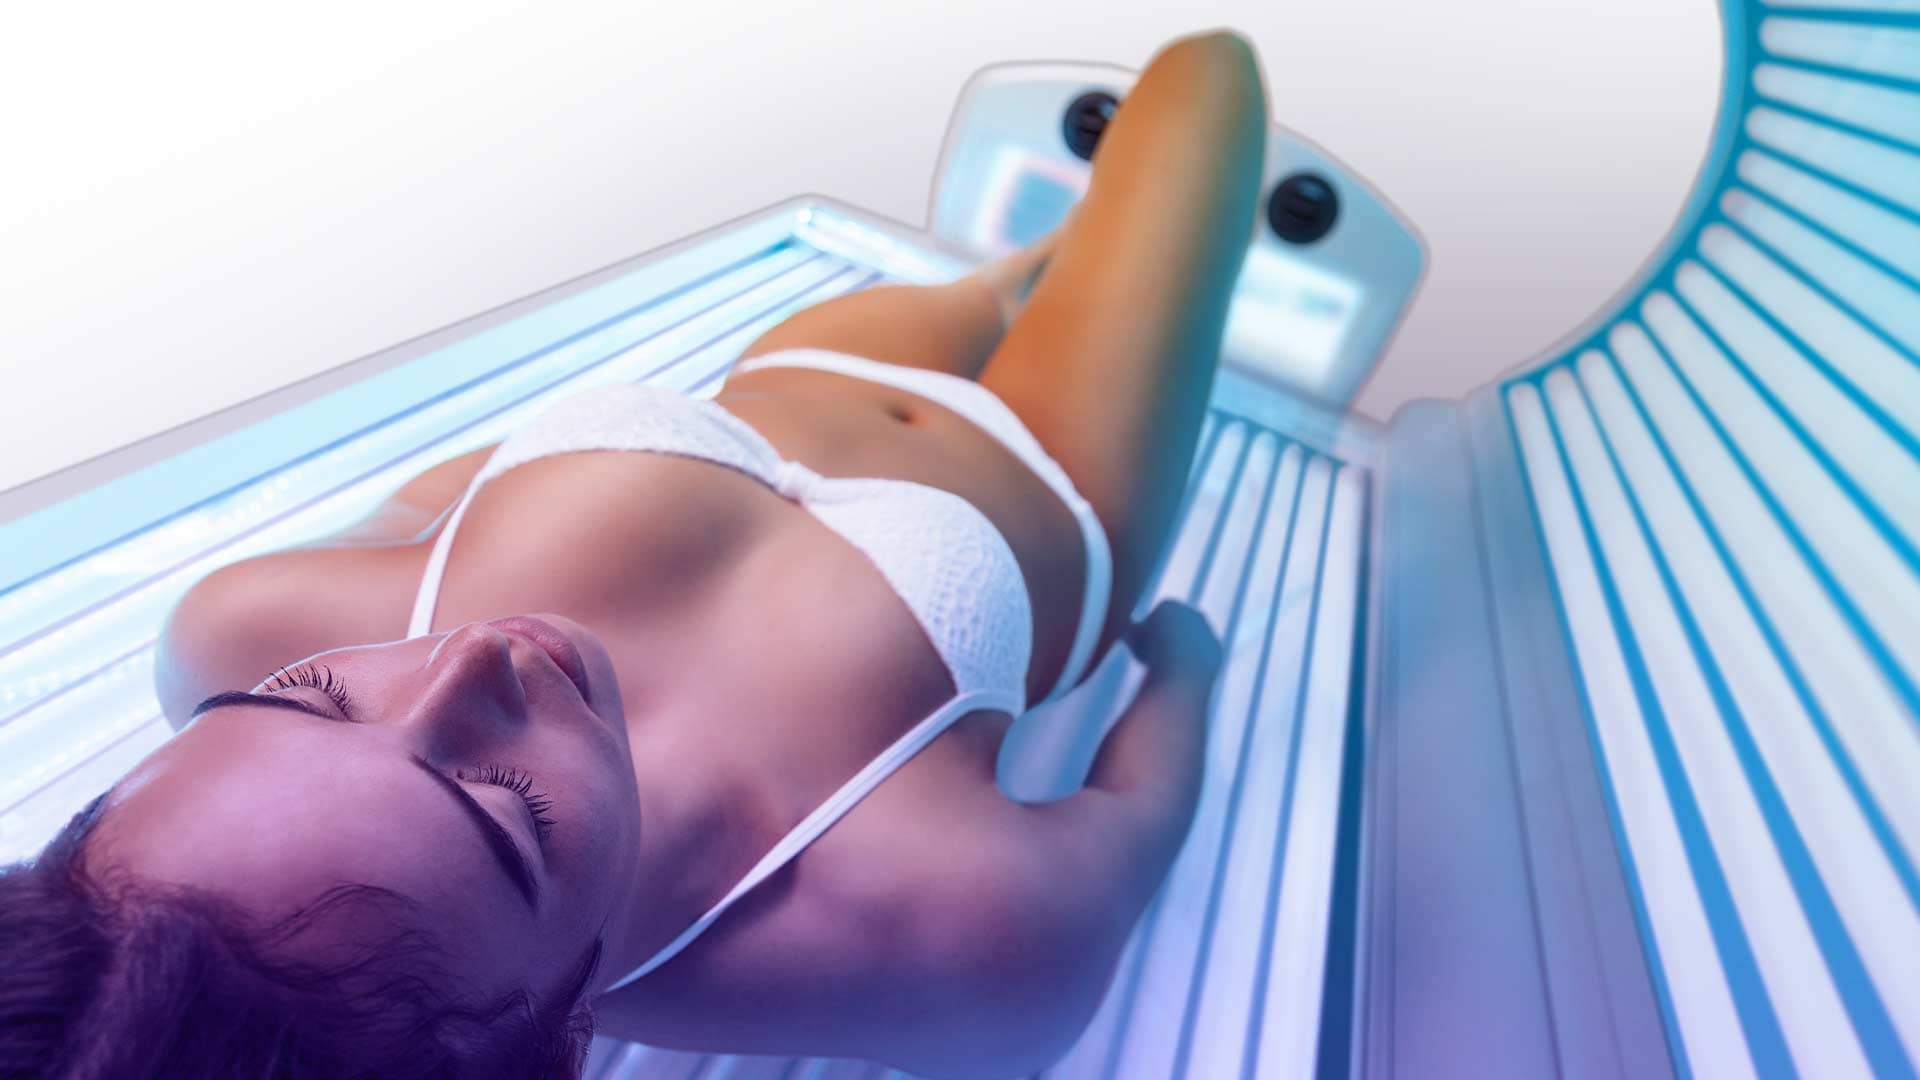 Ultrasun Q18 Tanning Bed With Model